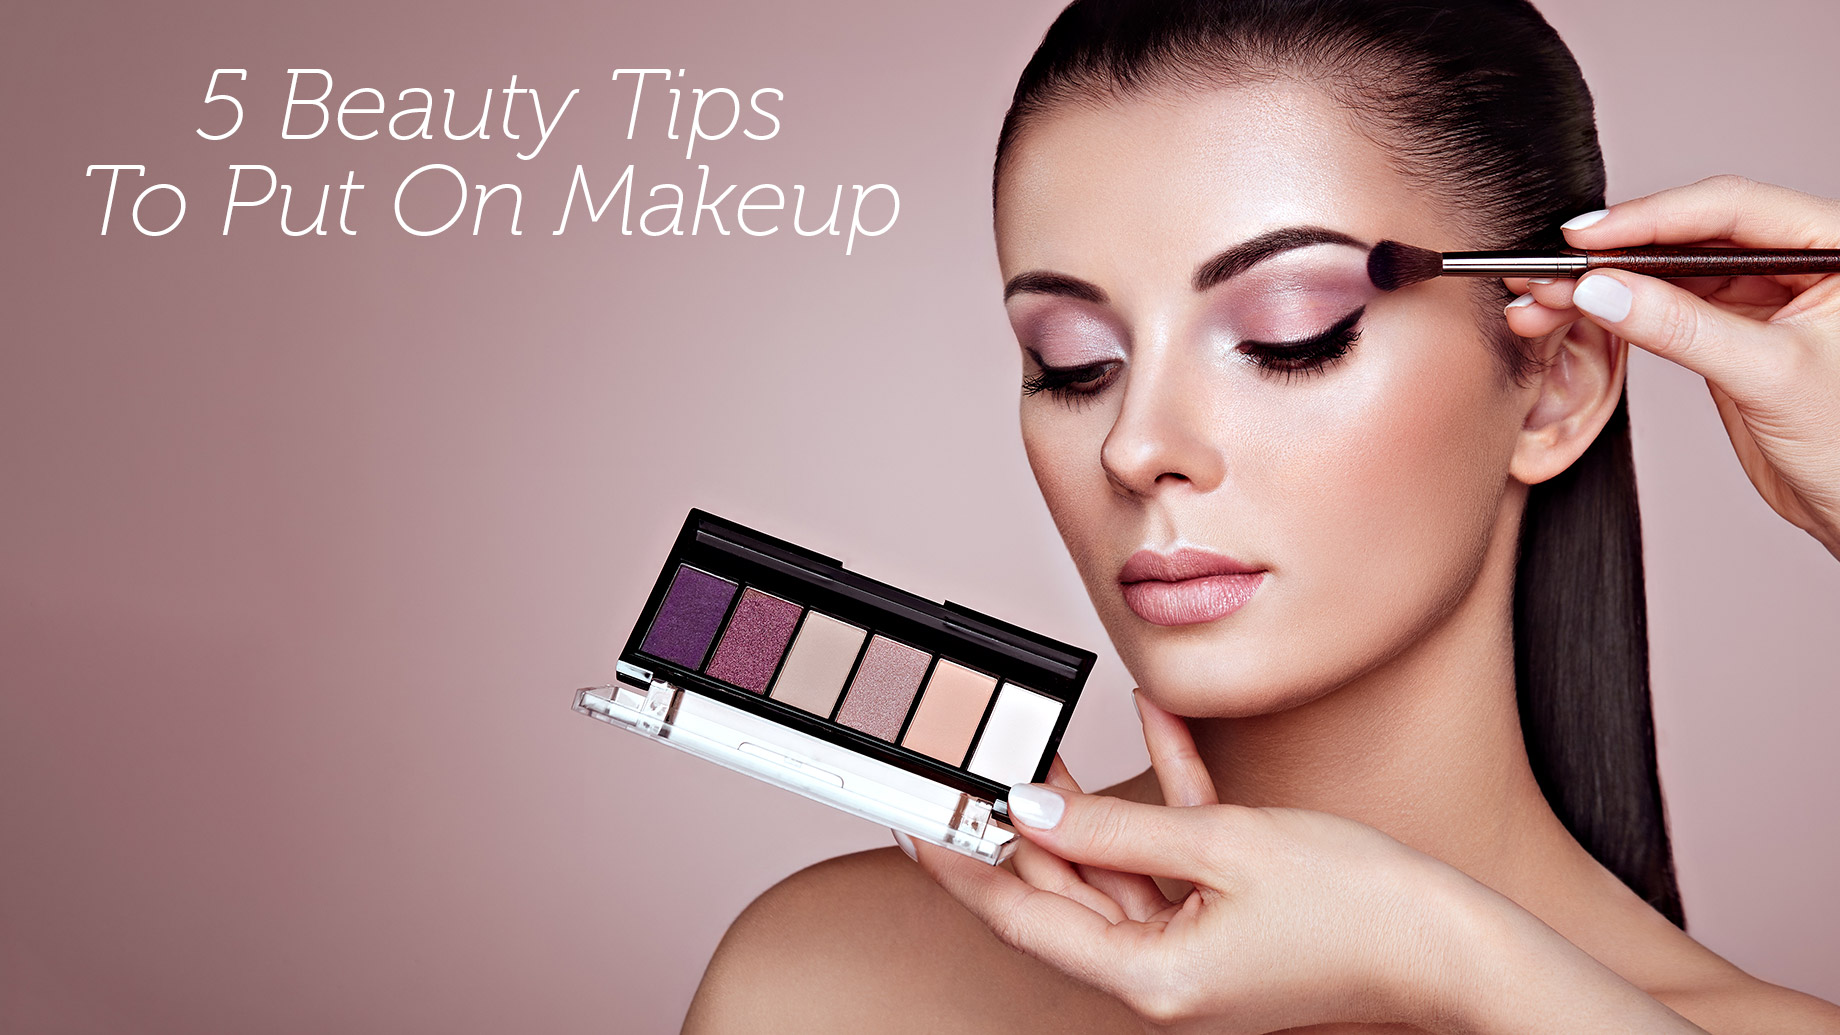 5 Beauty Tips To Put On Makeup